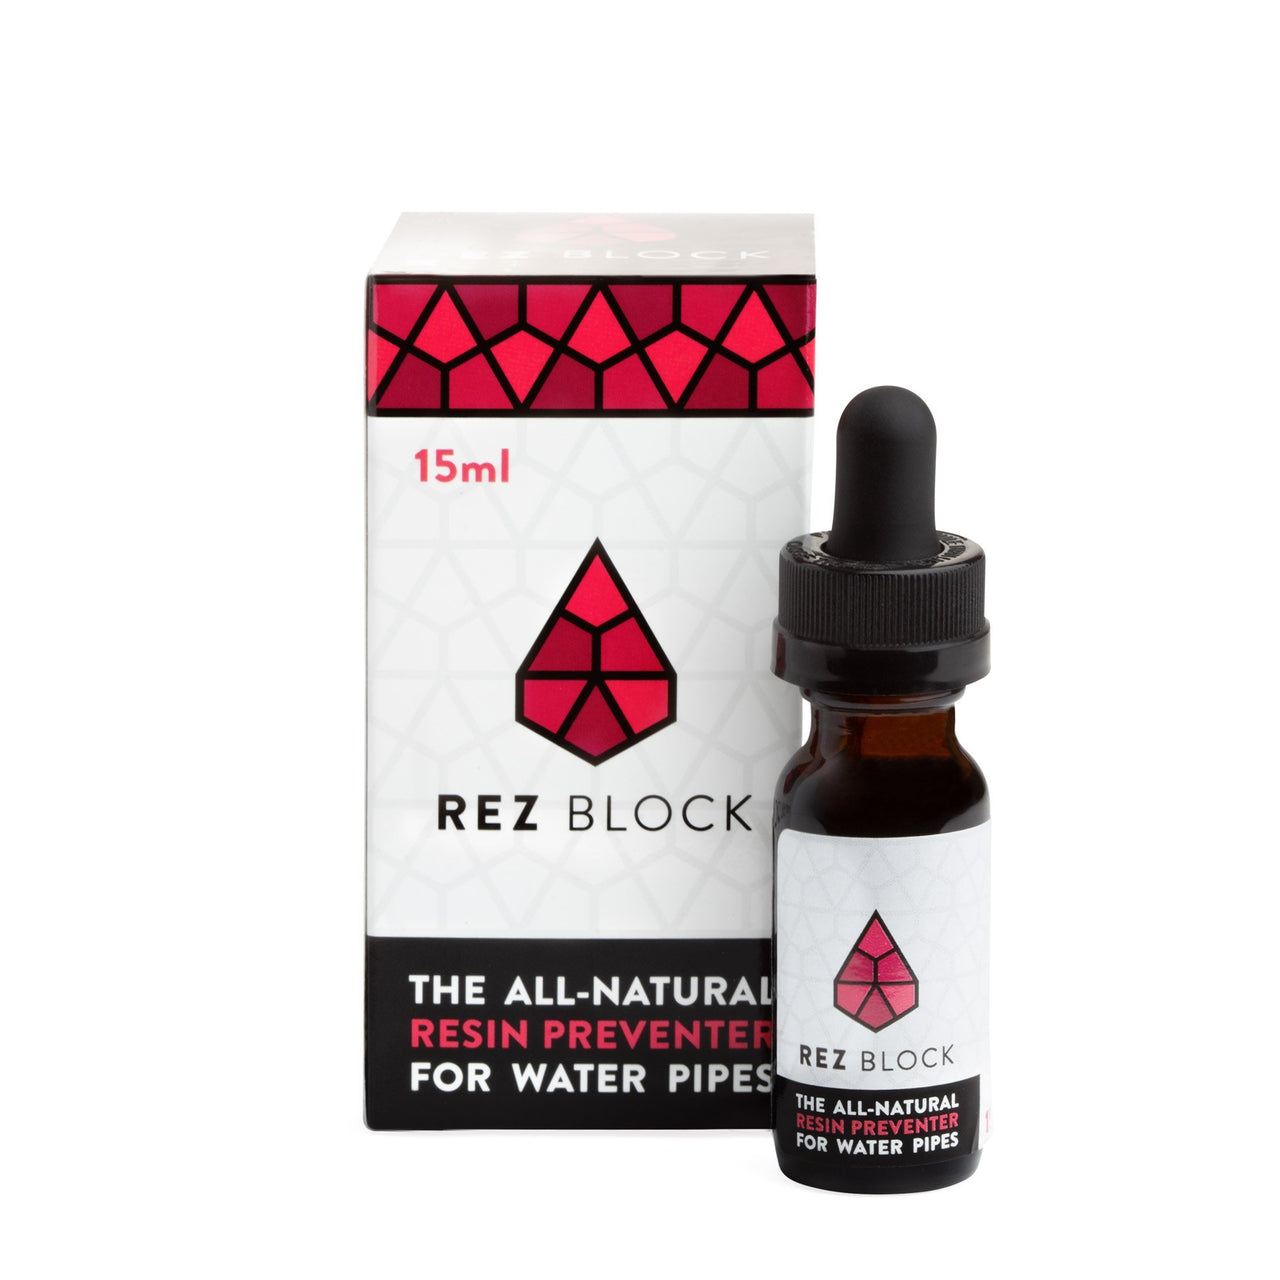 RezBlock - 420 Science - The most trusted online smoke shop.